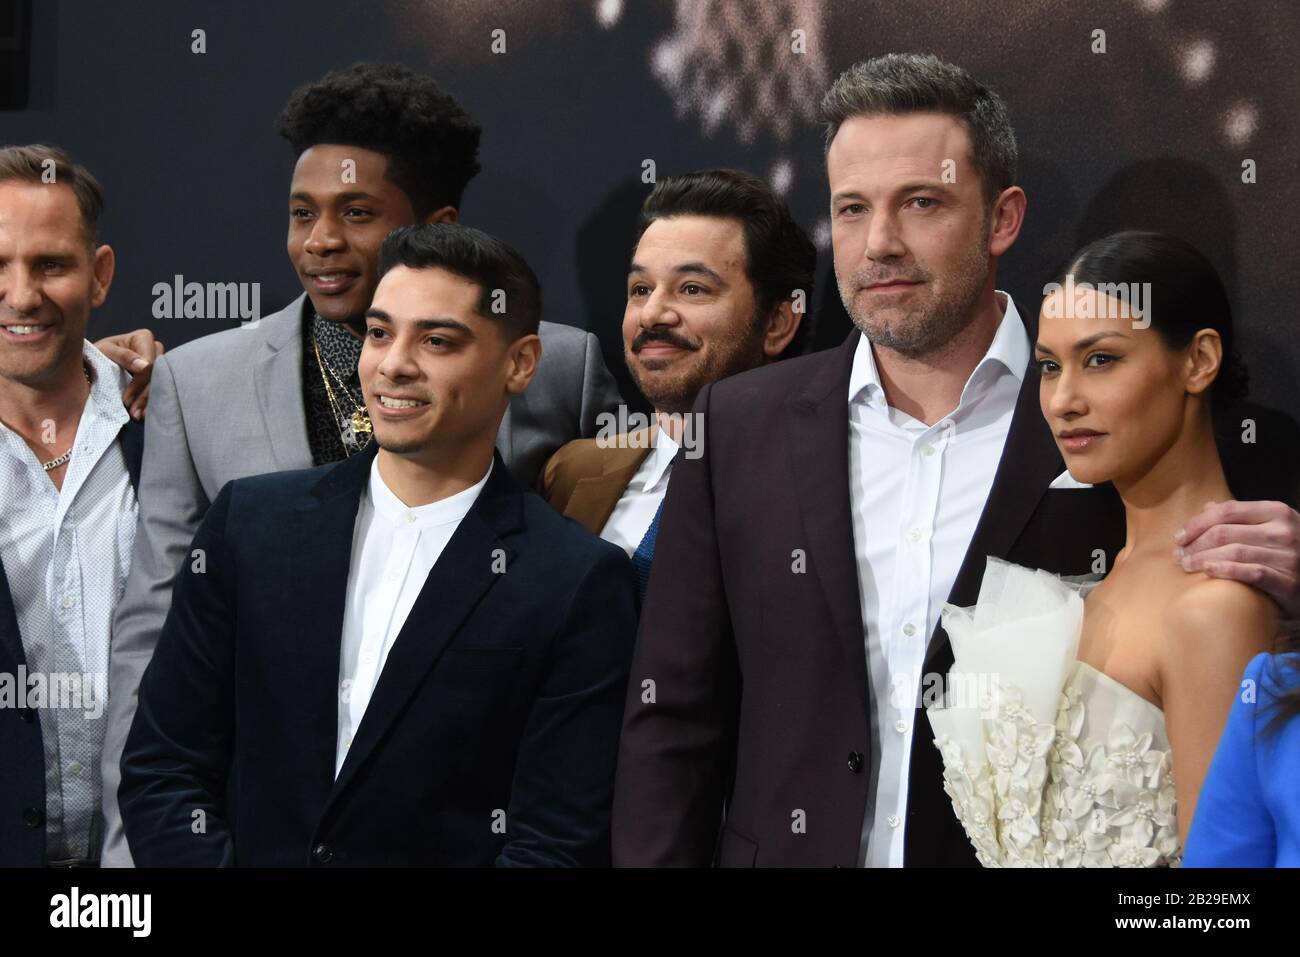 Los Angeles, California, USA 1st March 2020 (L-R) Actor Chris Bruno, actor Melvin Gregg, actor Fernando Luis Vega, actor Al Madrigal, actor Ben Affleck, and actress Janina Gavankar attend Warner Bros. Pictures 'The Way Back' World Premiere on March 1, 2020 at Regal LA Live in Los Angeles, California, USA. Photo by Barry King/Alamy Live News Stock Photo